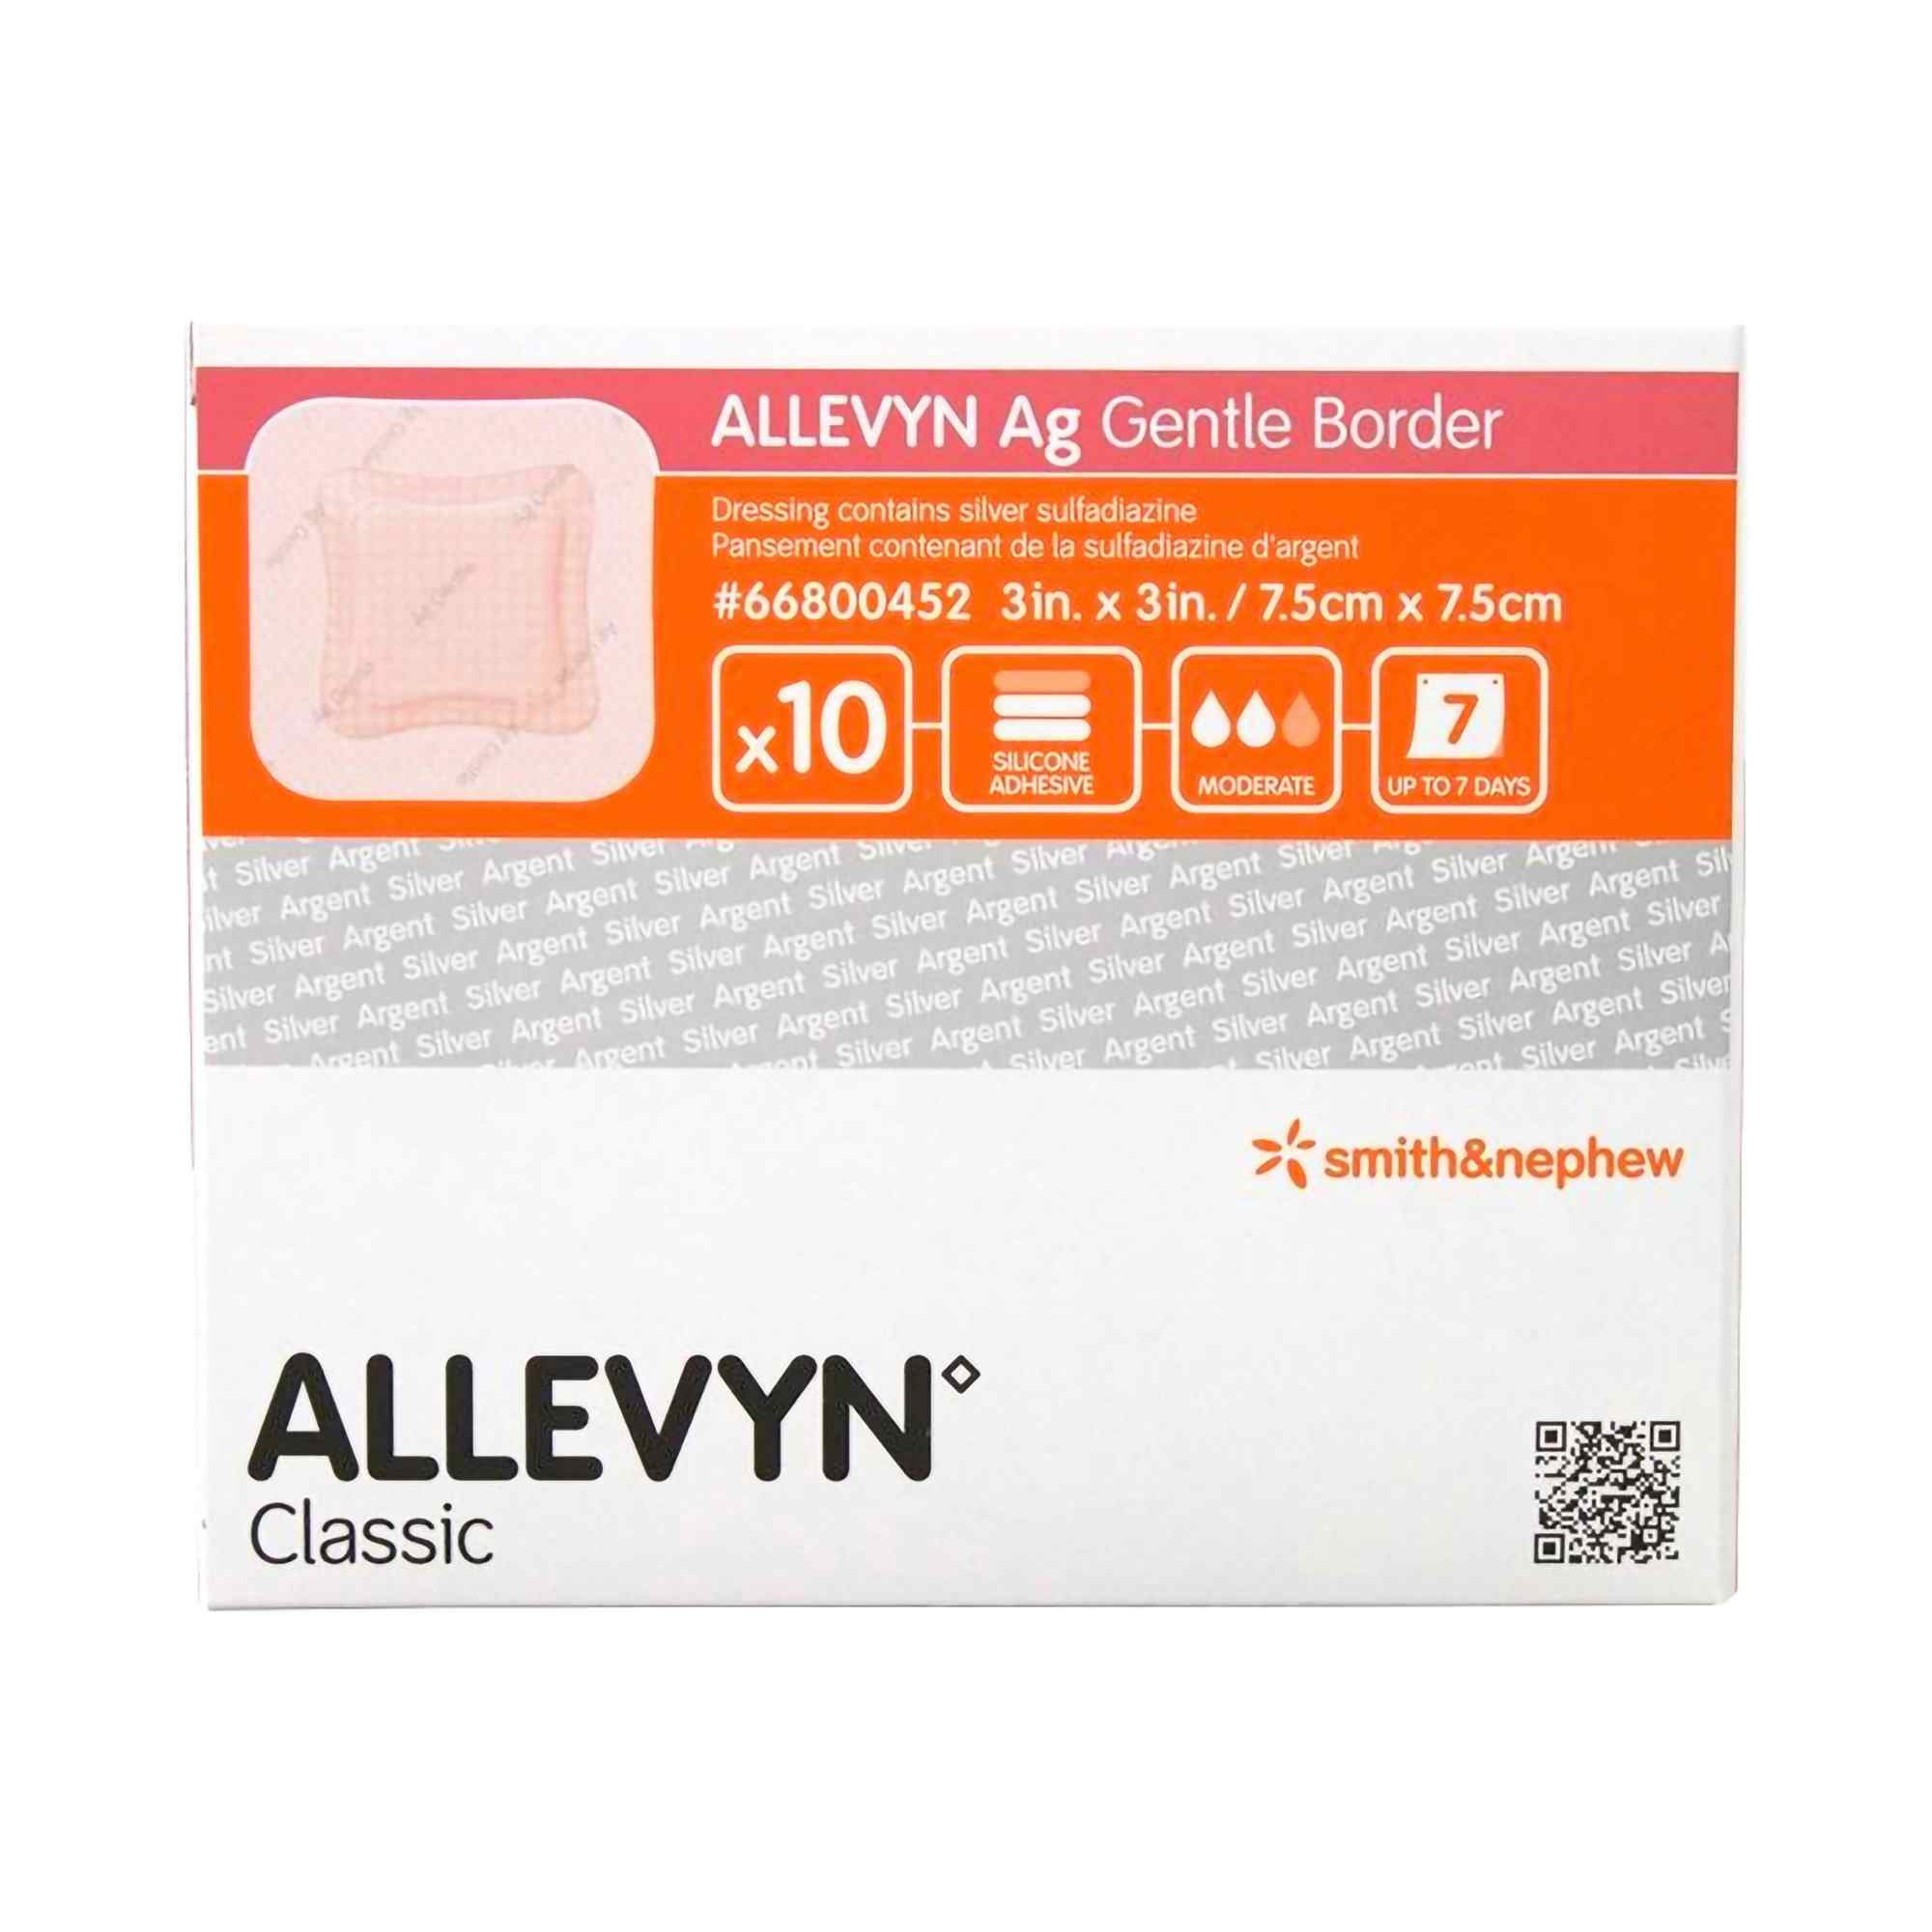 Smith & Nephew Allevyn Ag Gentle Border Dressing with Silver, 3 X 3", 66800452, Box of 10